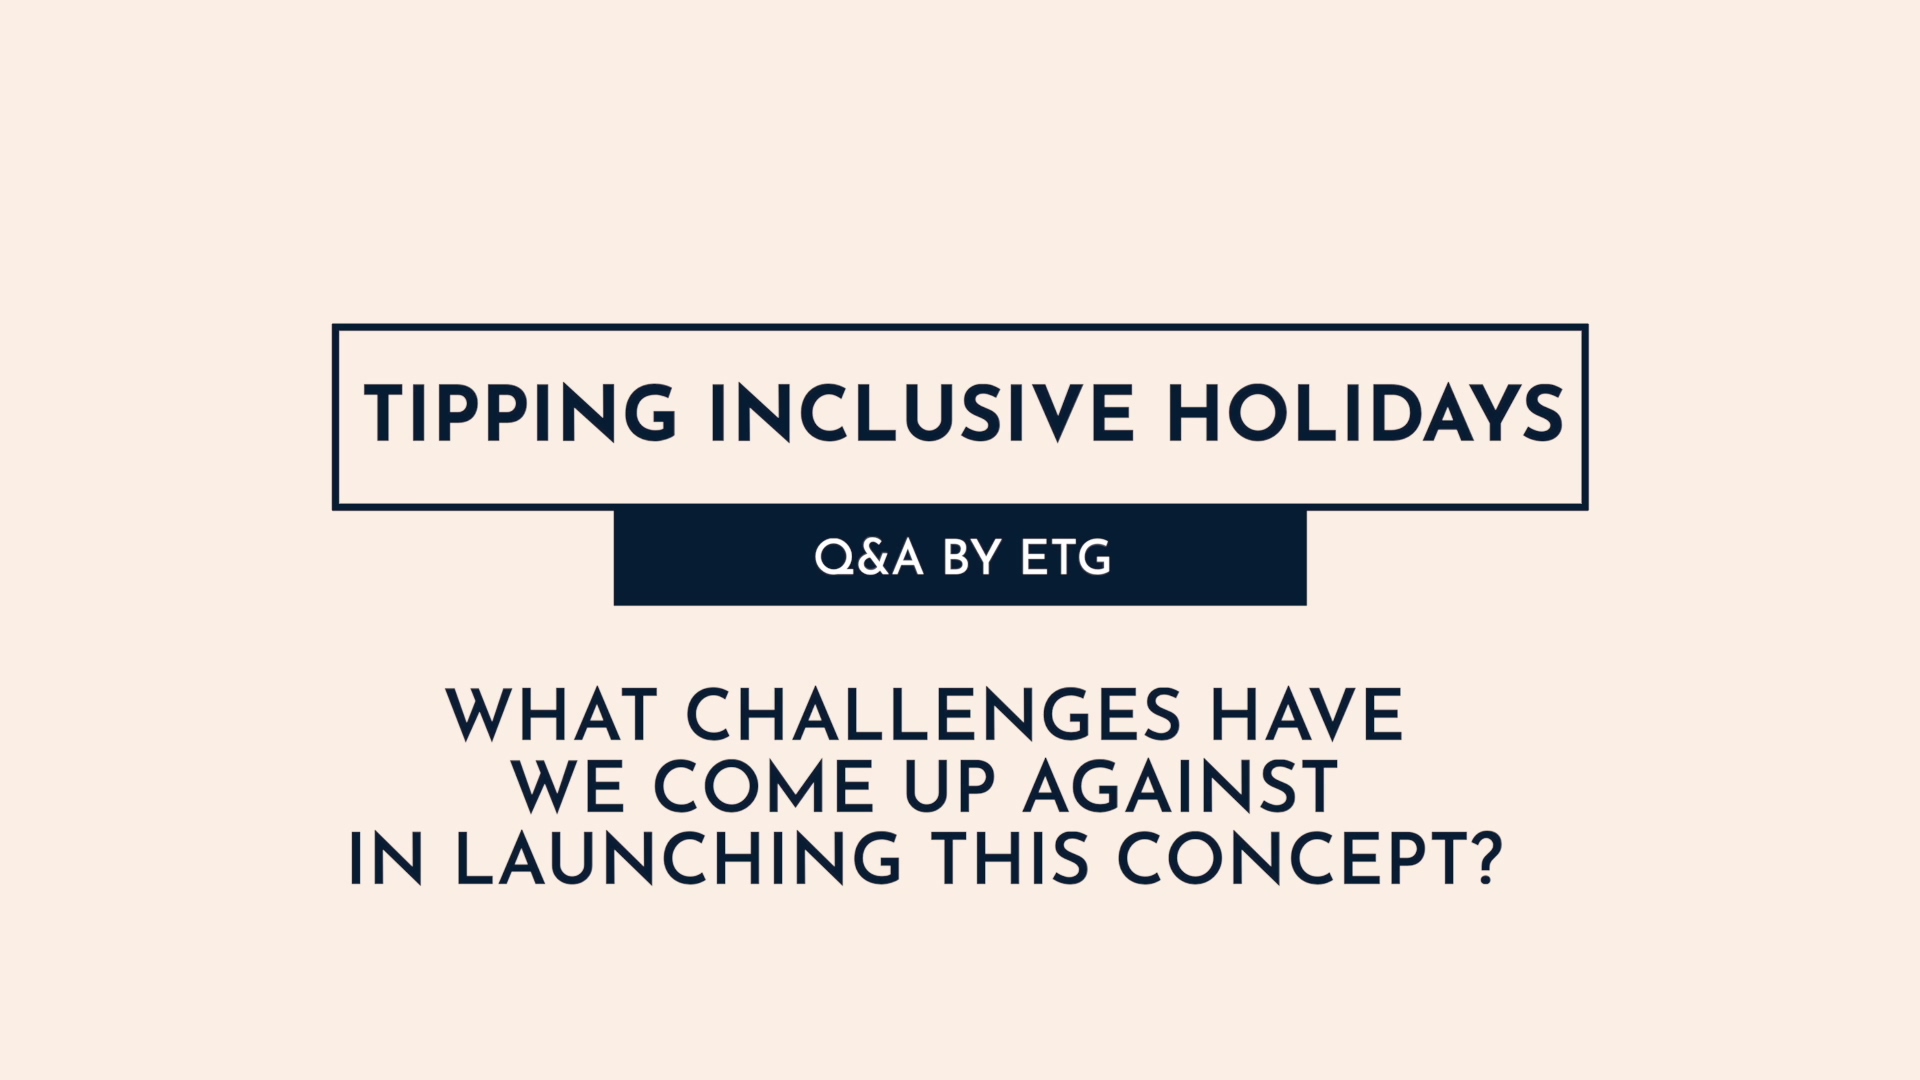 4 - What challenges have we come across in launching tip inclusive holidays